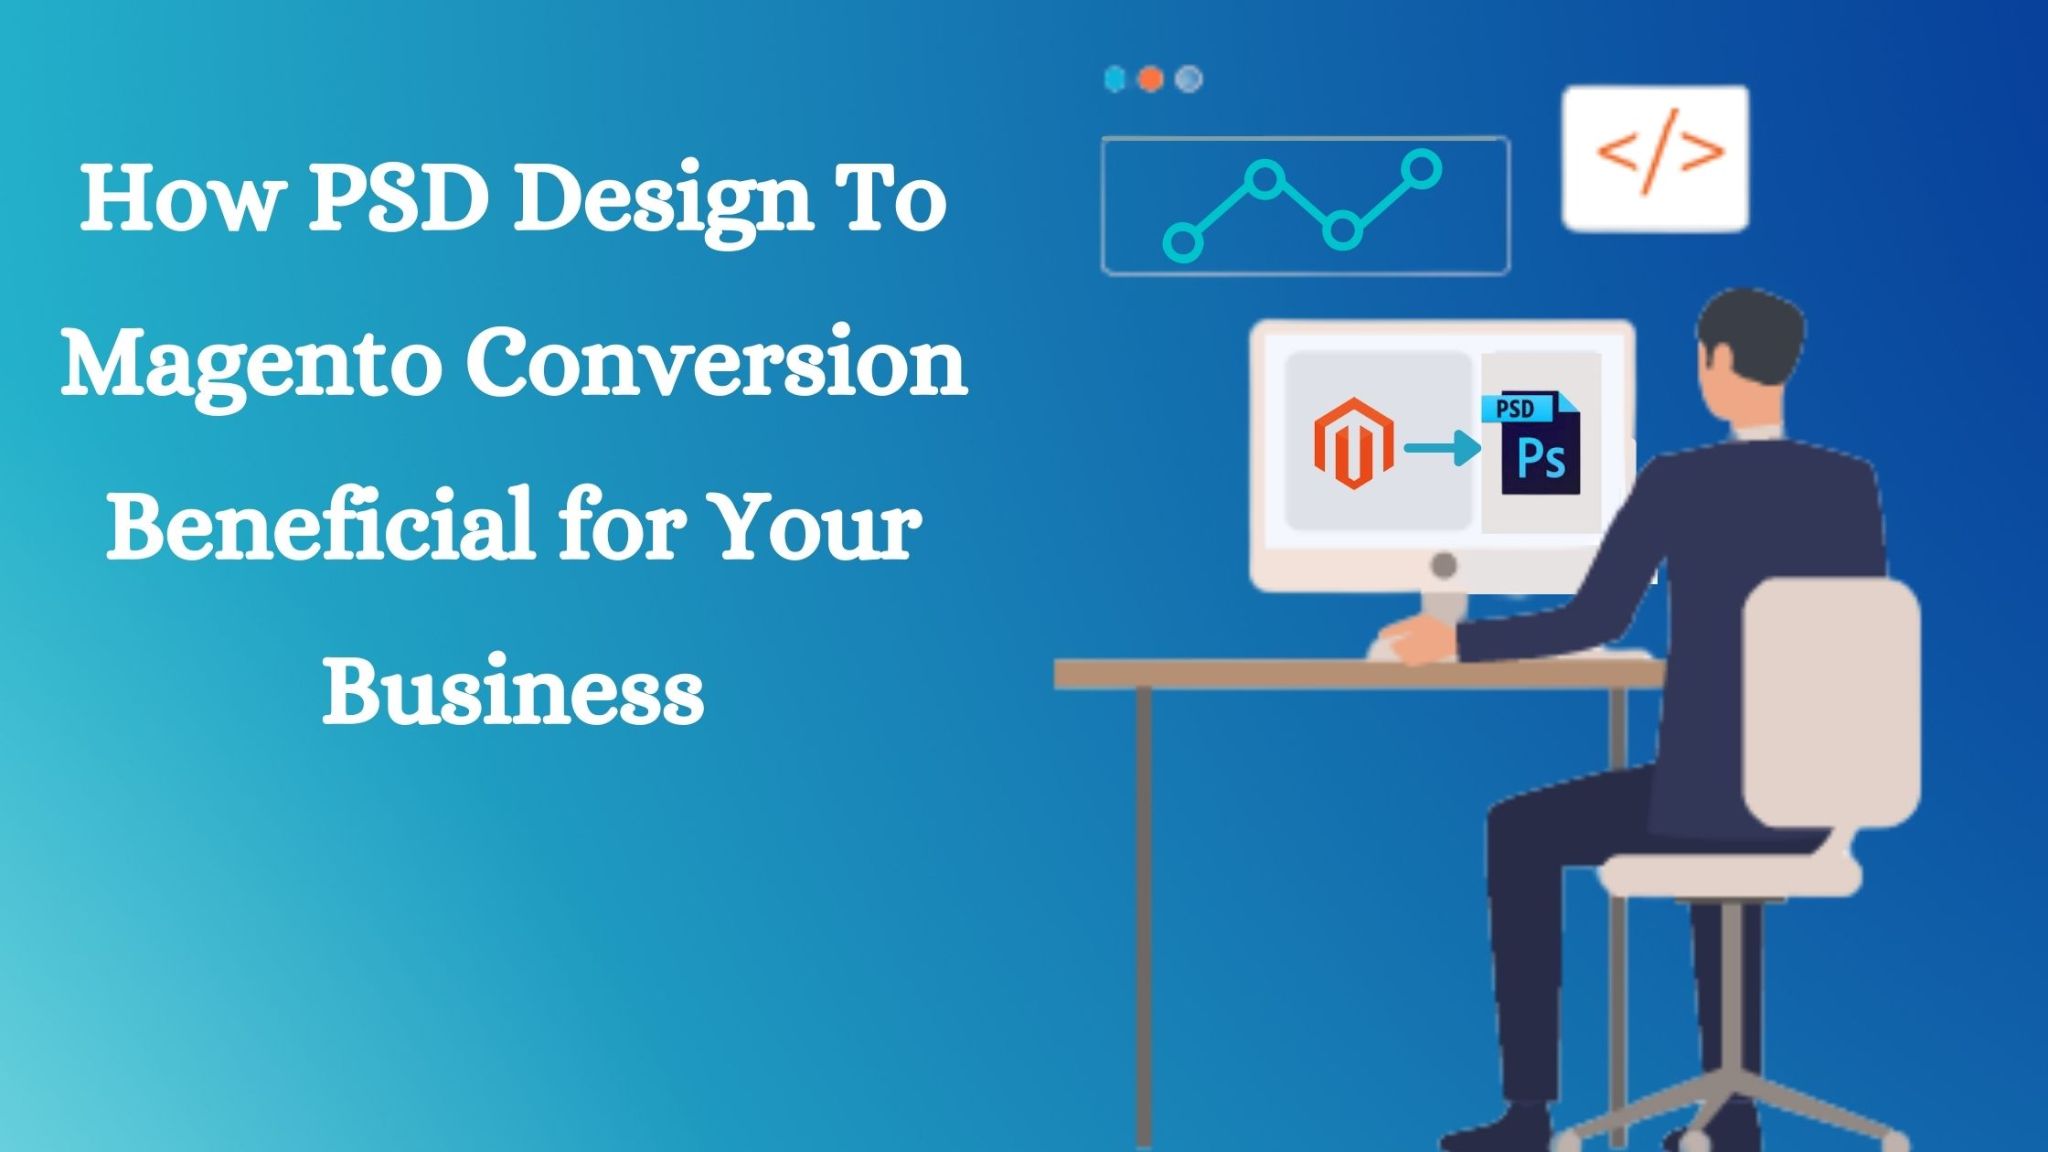 How is PSD Design to Magento Conversion Beneficial for Your Business?